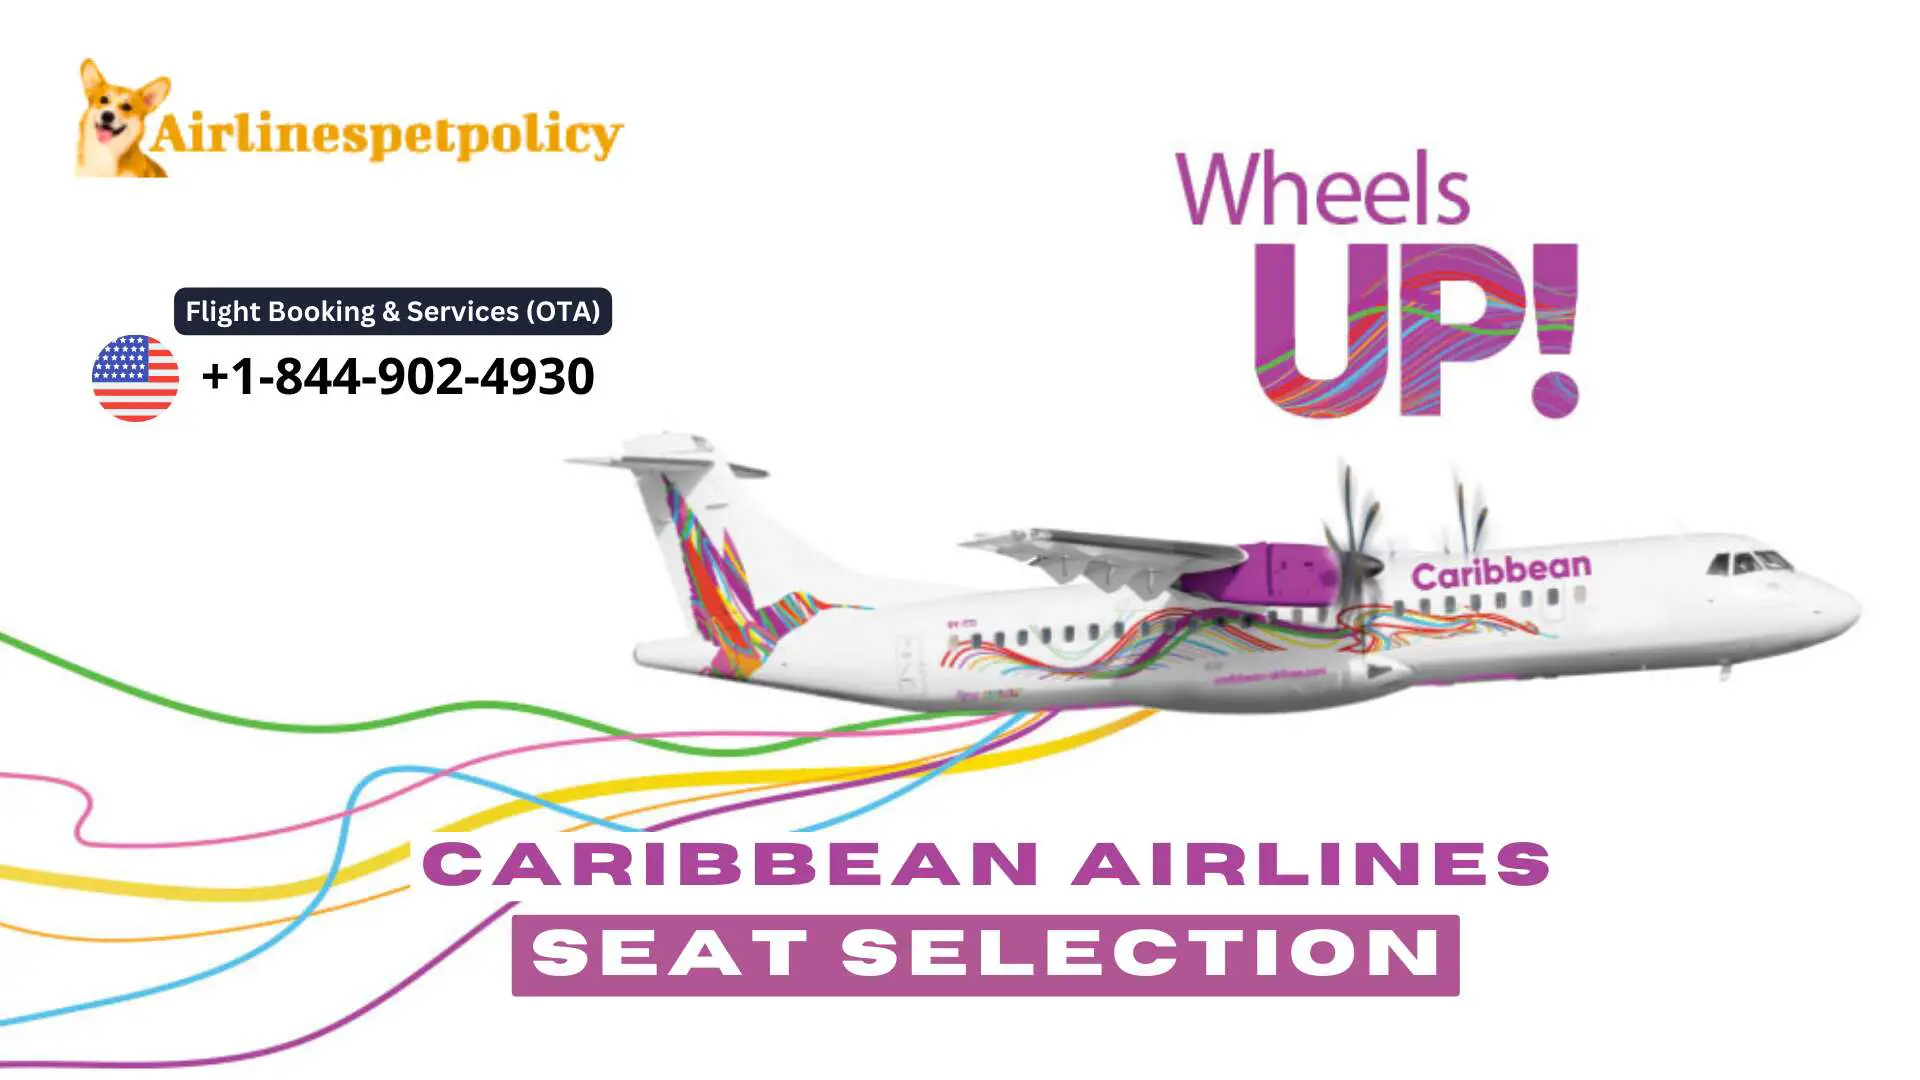 Caribbean Airlines Seat Selection